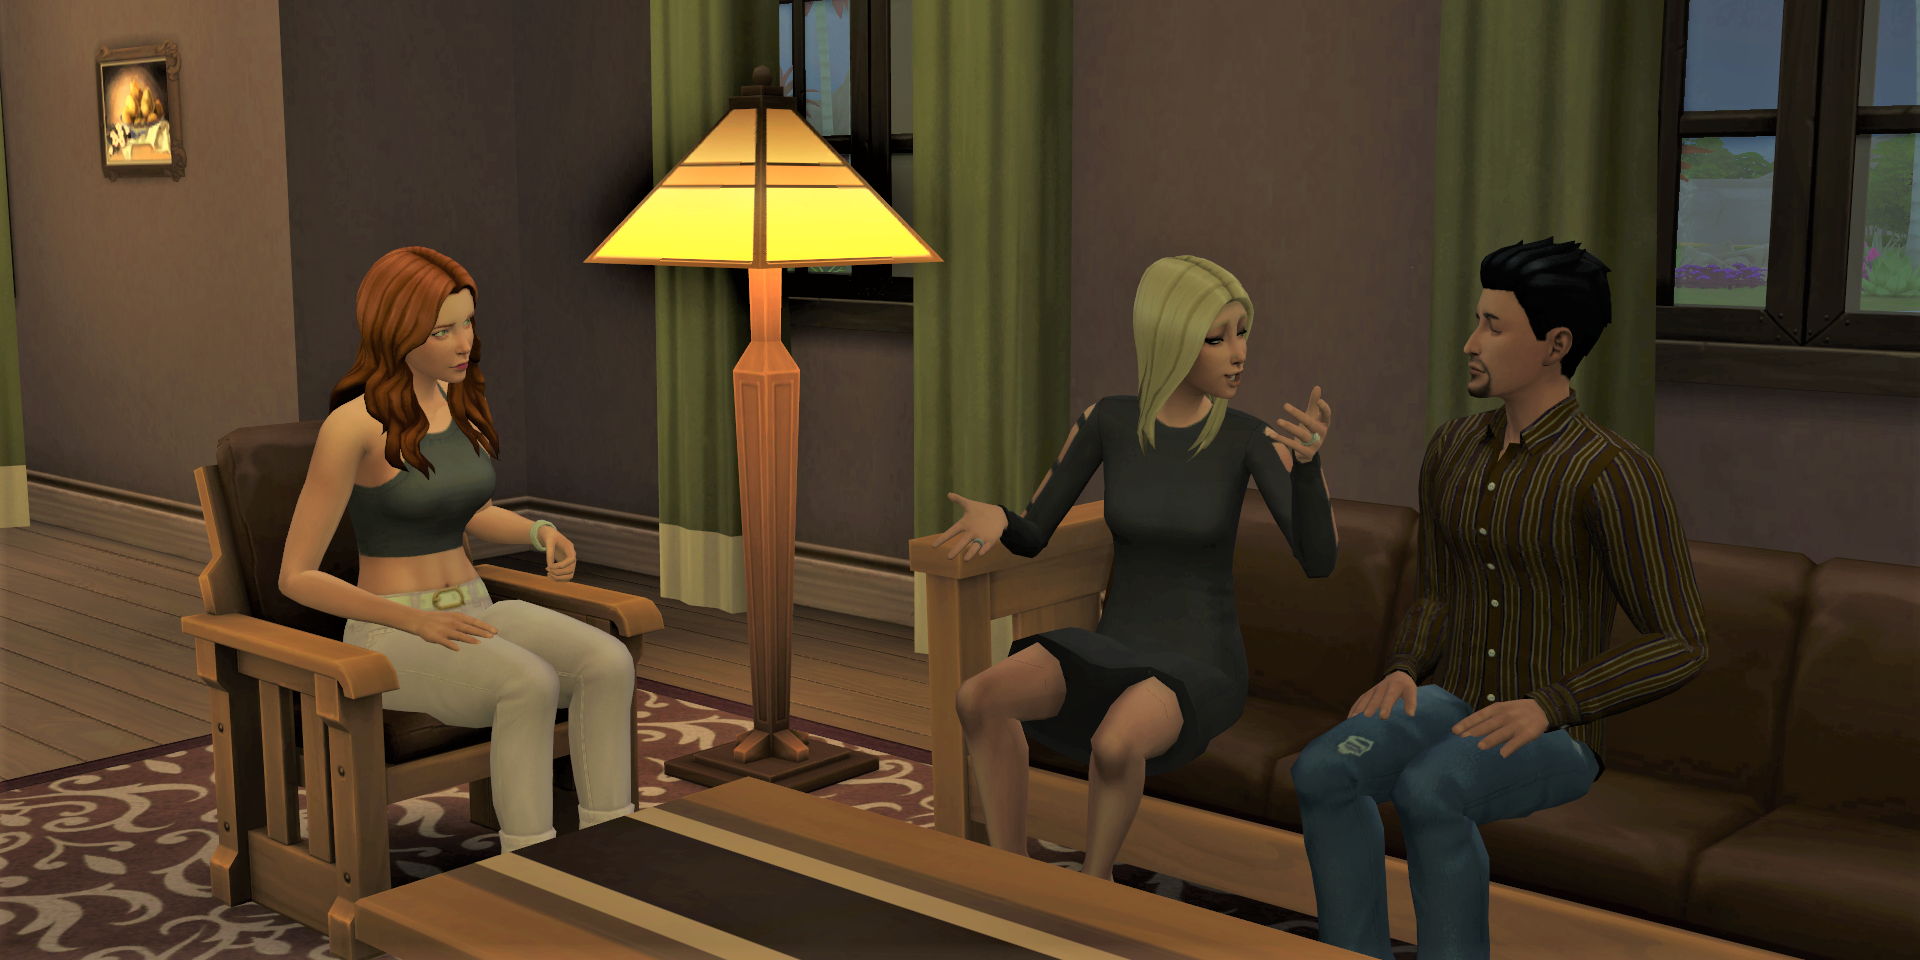 Dina and Nina Caliente talk to Don Lothario in their Oasis Springs home in The Sims 4